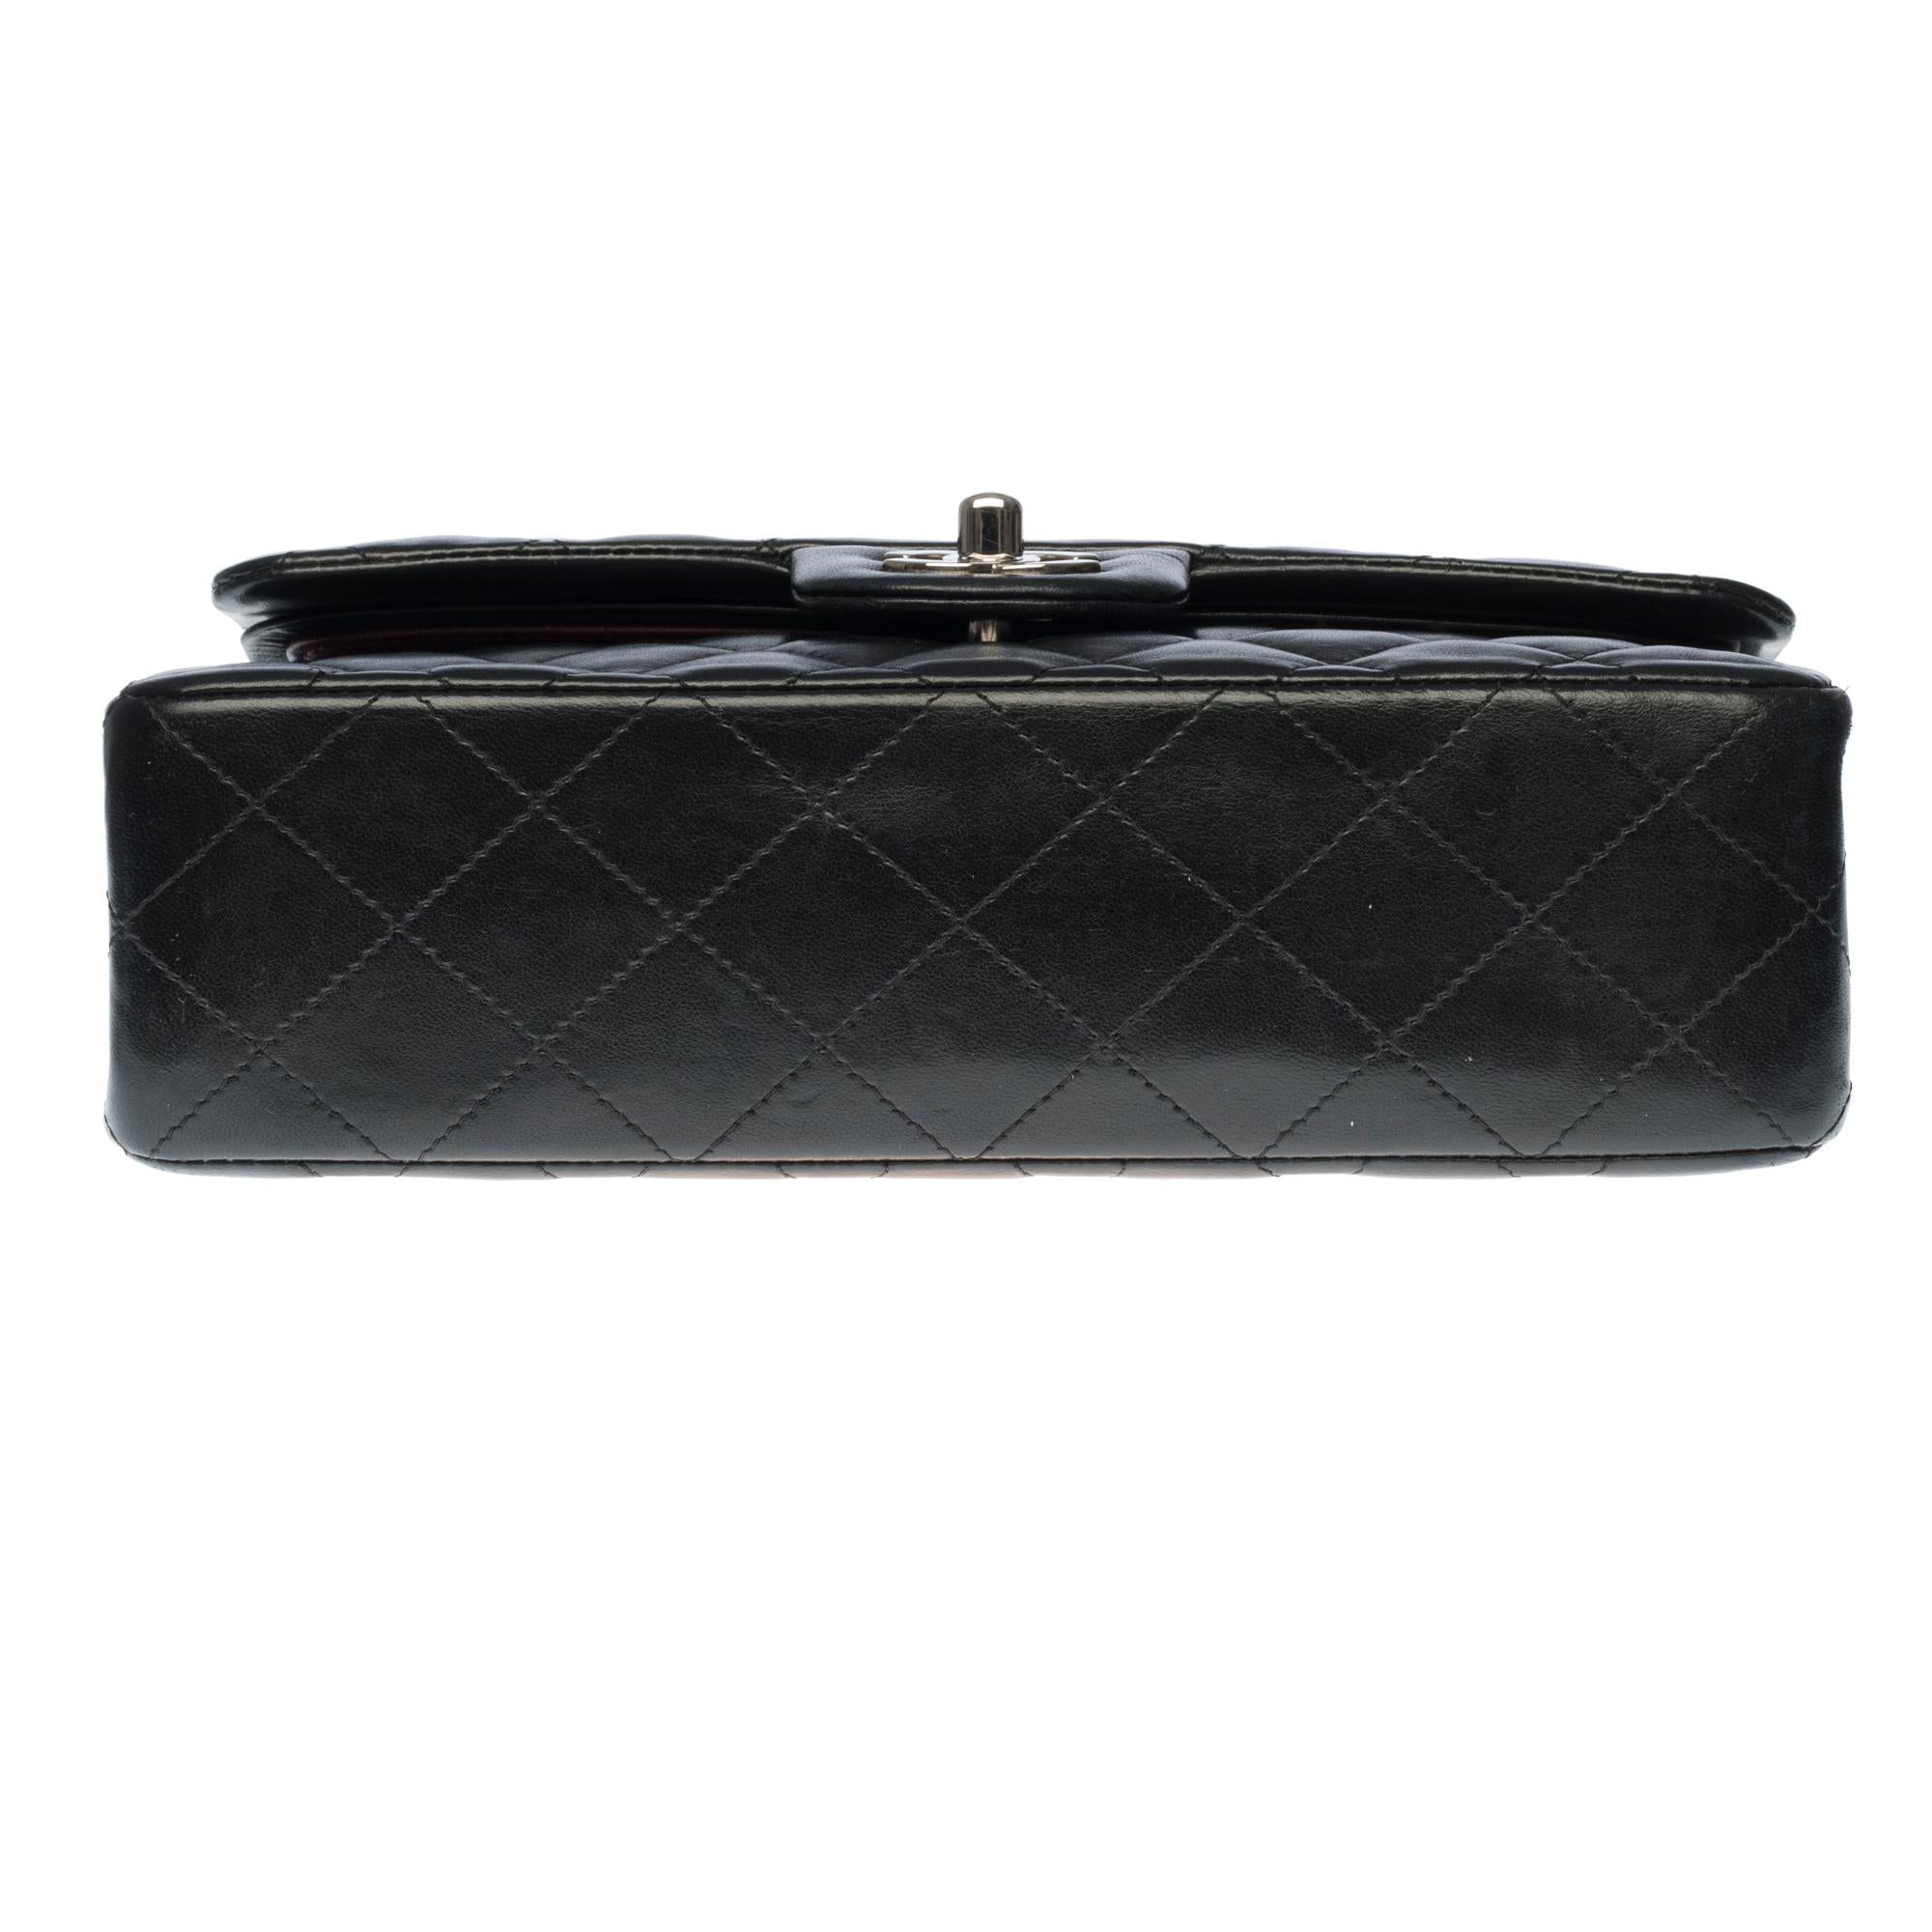 The Coveted Chanel Timeless 23cm Shoulder bag in black quilted lambskin, SHW 1